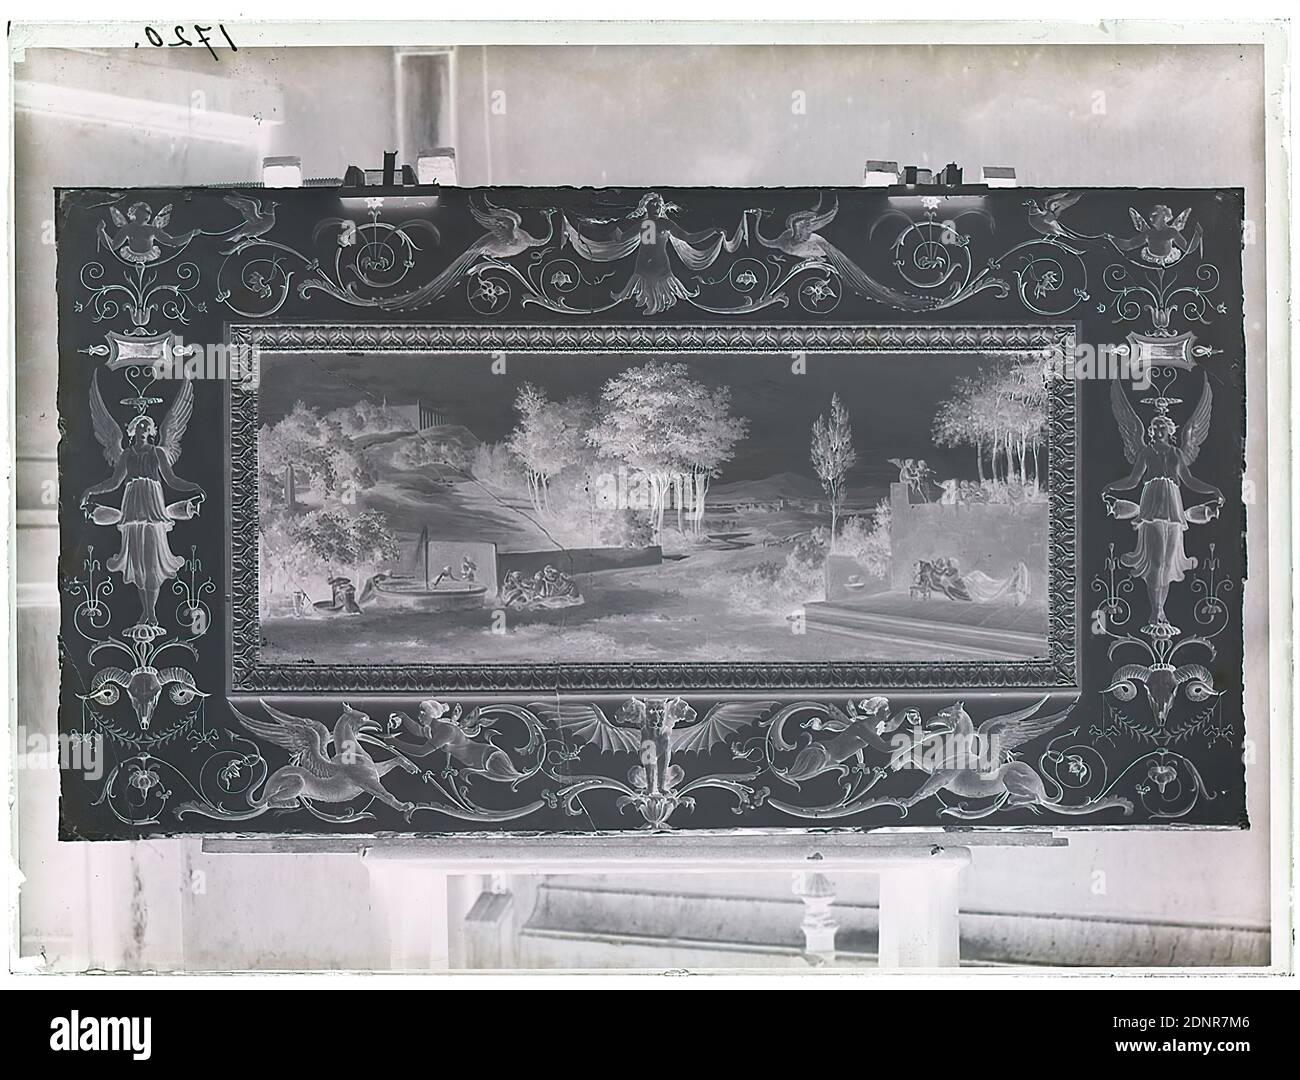 Wilhelm Weimar, mural from the Abendroth House, Hamburg, glass negative, black and white negative process, total: height: 23.8 cm; width: 17.8 cm, numbered: top left : in black ink: 1720, painting, ornaments, idylls, rural scenes, arcadian scenes, birds, grotesque (ornament), fabulous animals, interior decoration (of a house), mural painting Stock Photo